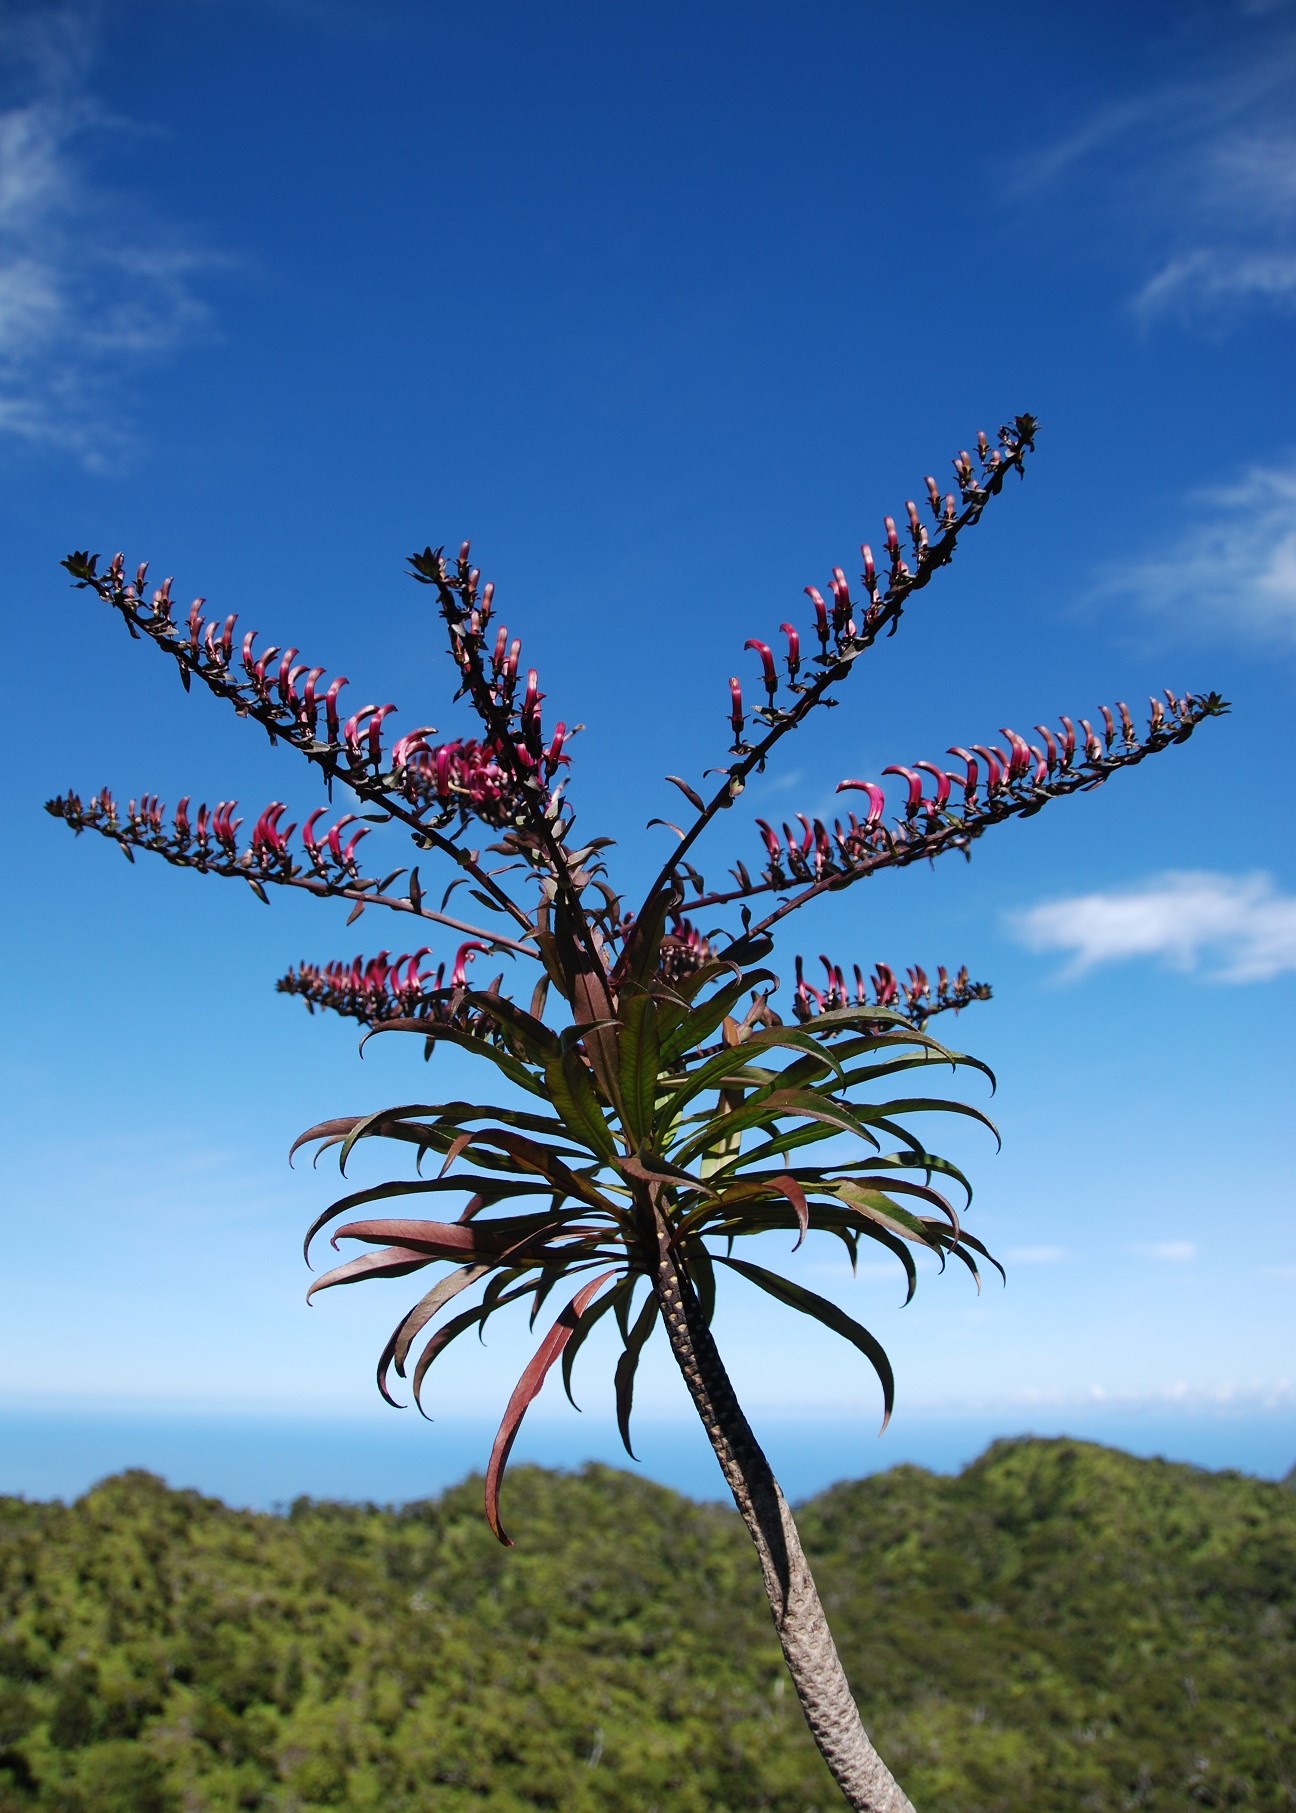 A tall woody stem with leaf scars, ending in several whorls of simple lanceolate leaves with nine visible infloresence spikes emerging from the top. On each infloresence spike is a row many curved pink flowers all facing towards the sky. In the background are forested hills and the ocean